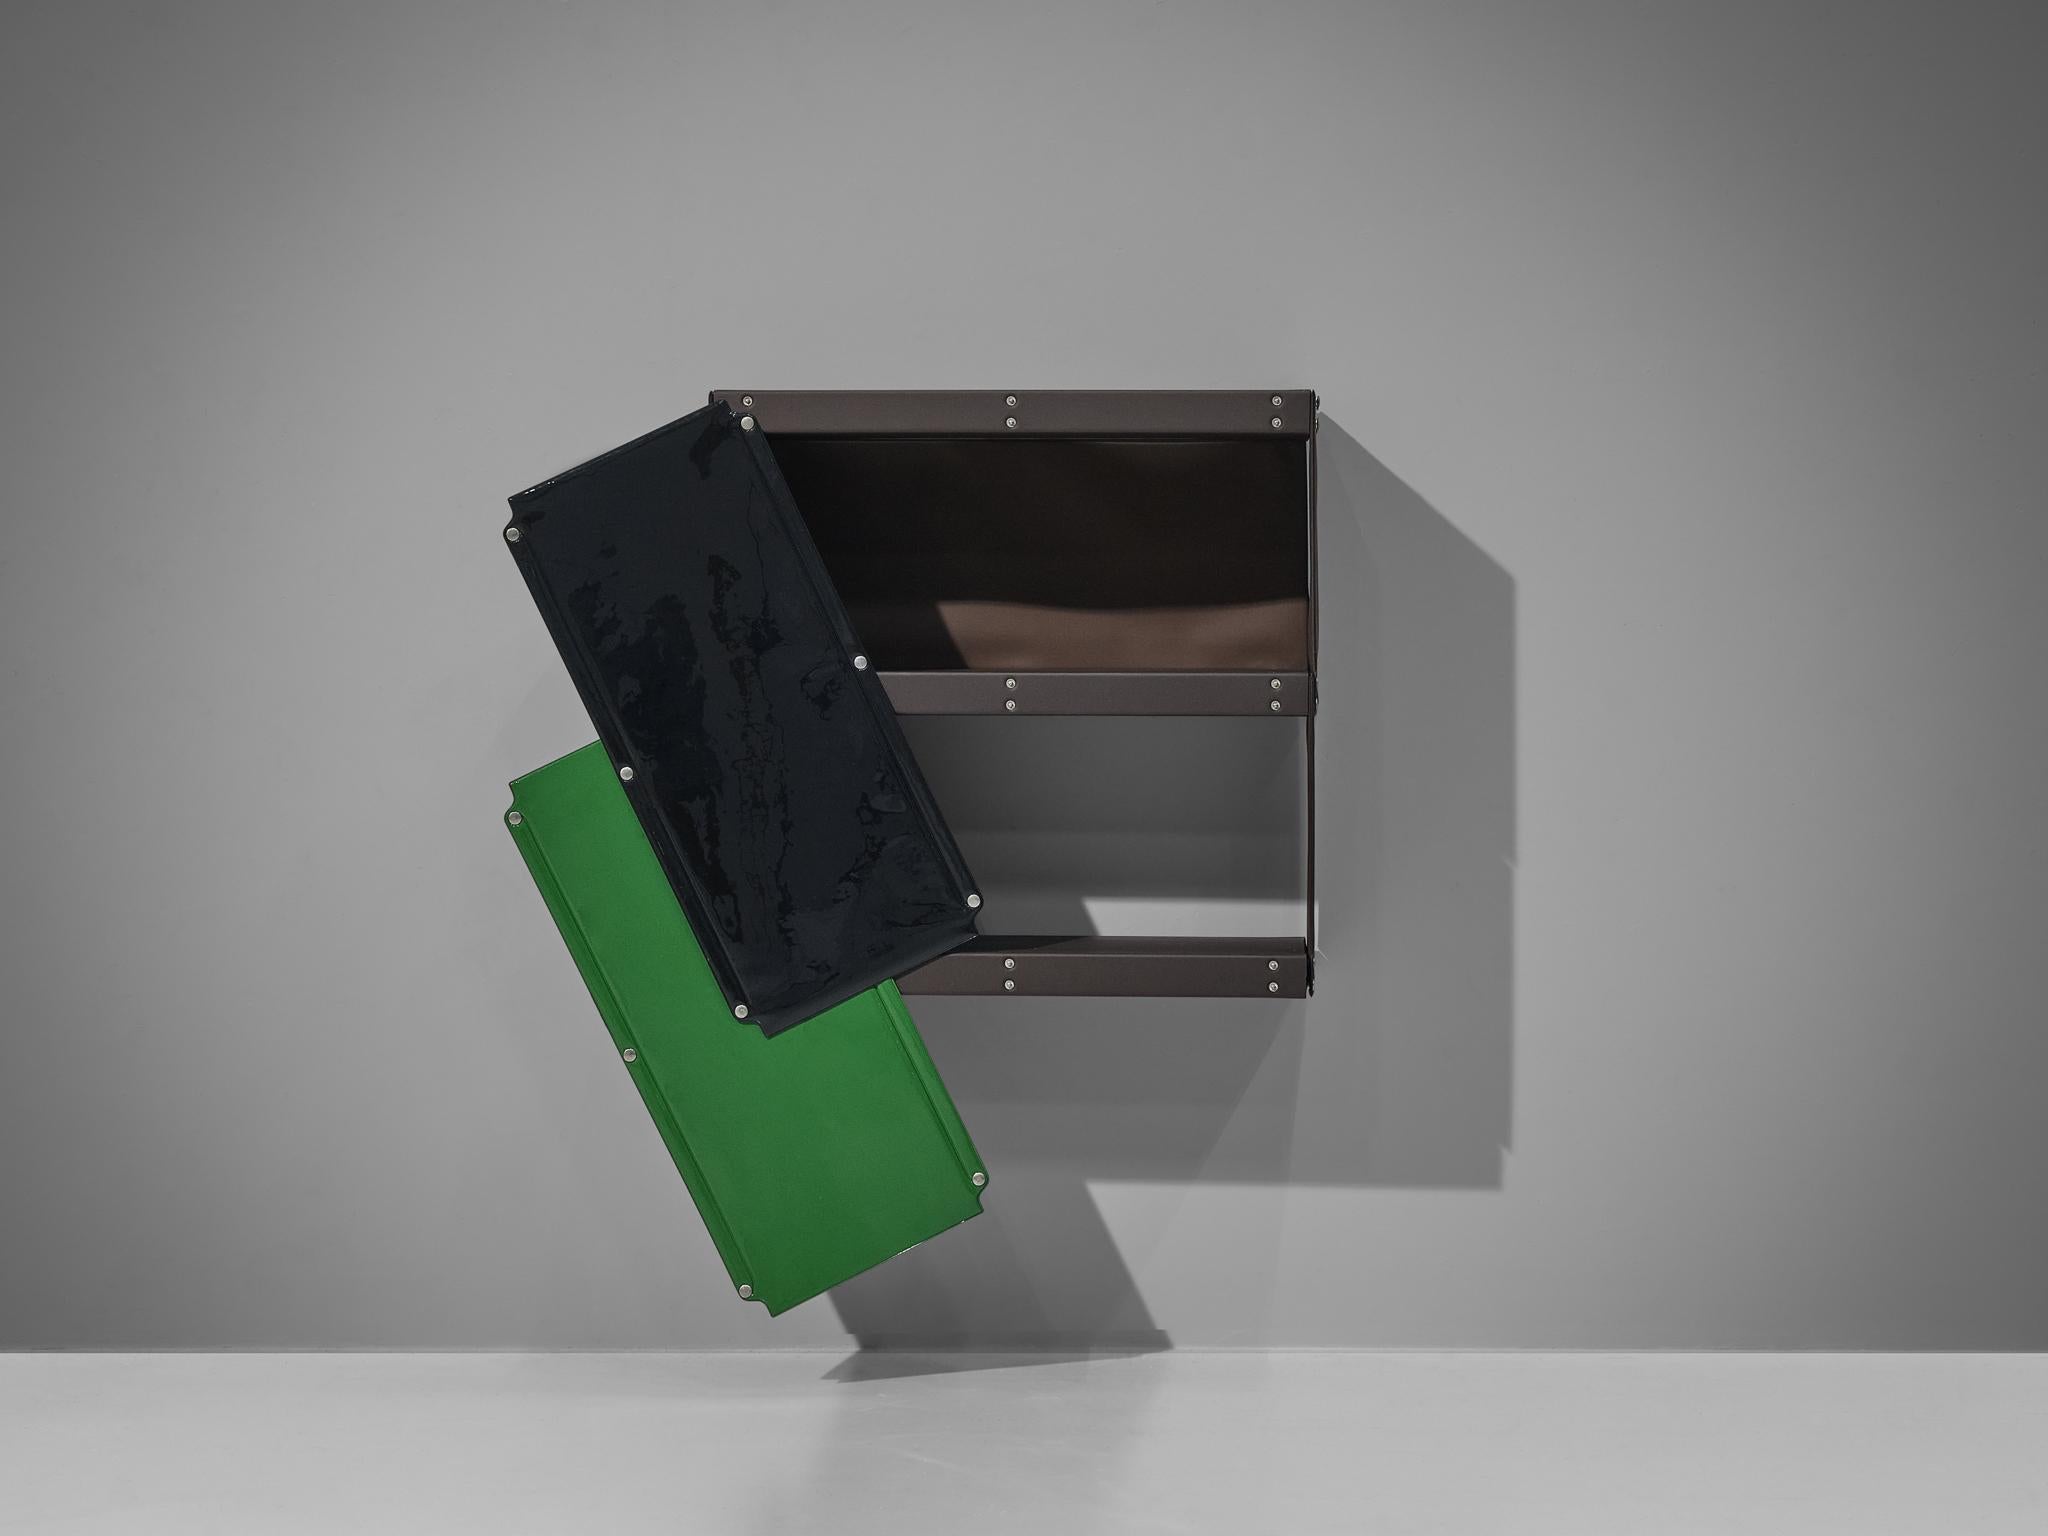 Otto Zapf for Zapfdesign 'Softline' green and brown cabinets, plastic, metal, Germany, 1969.

Set of two detachable 'Softline' wall cabinets in green and black designed by the German designer Otto Zapf. Zippers and press studs form the connections